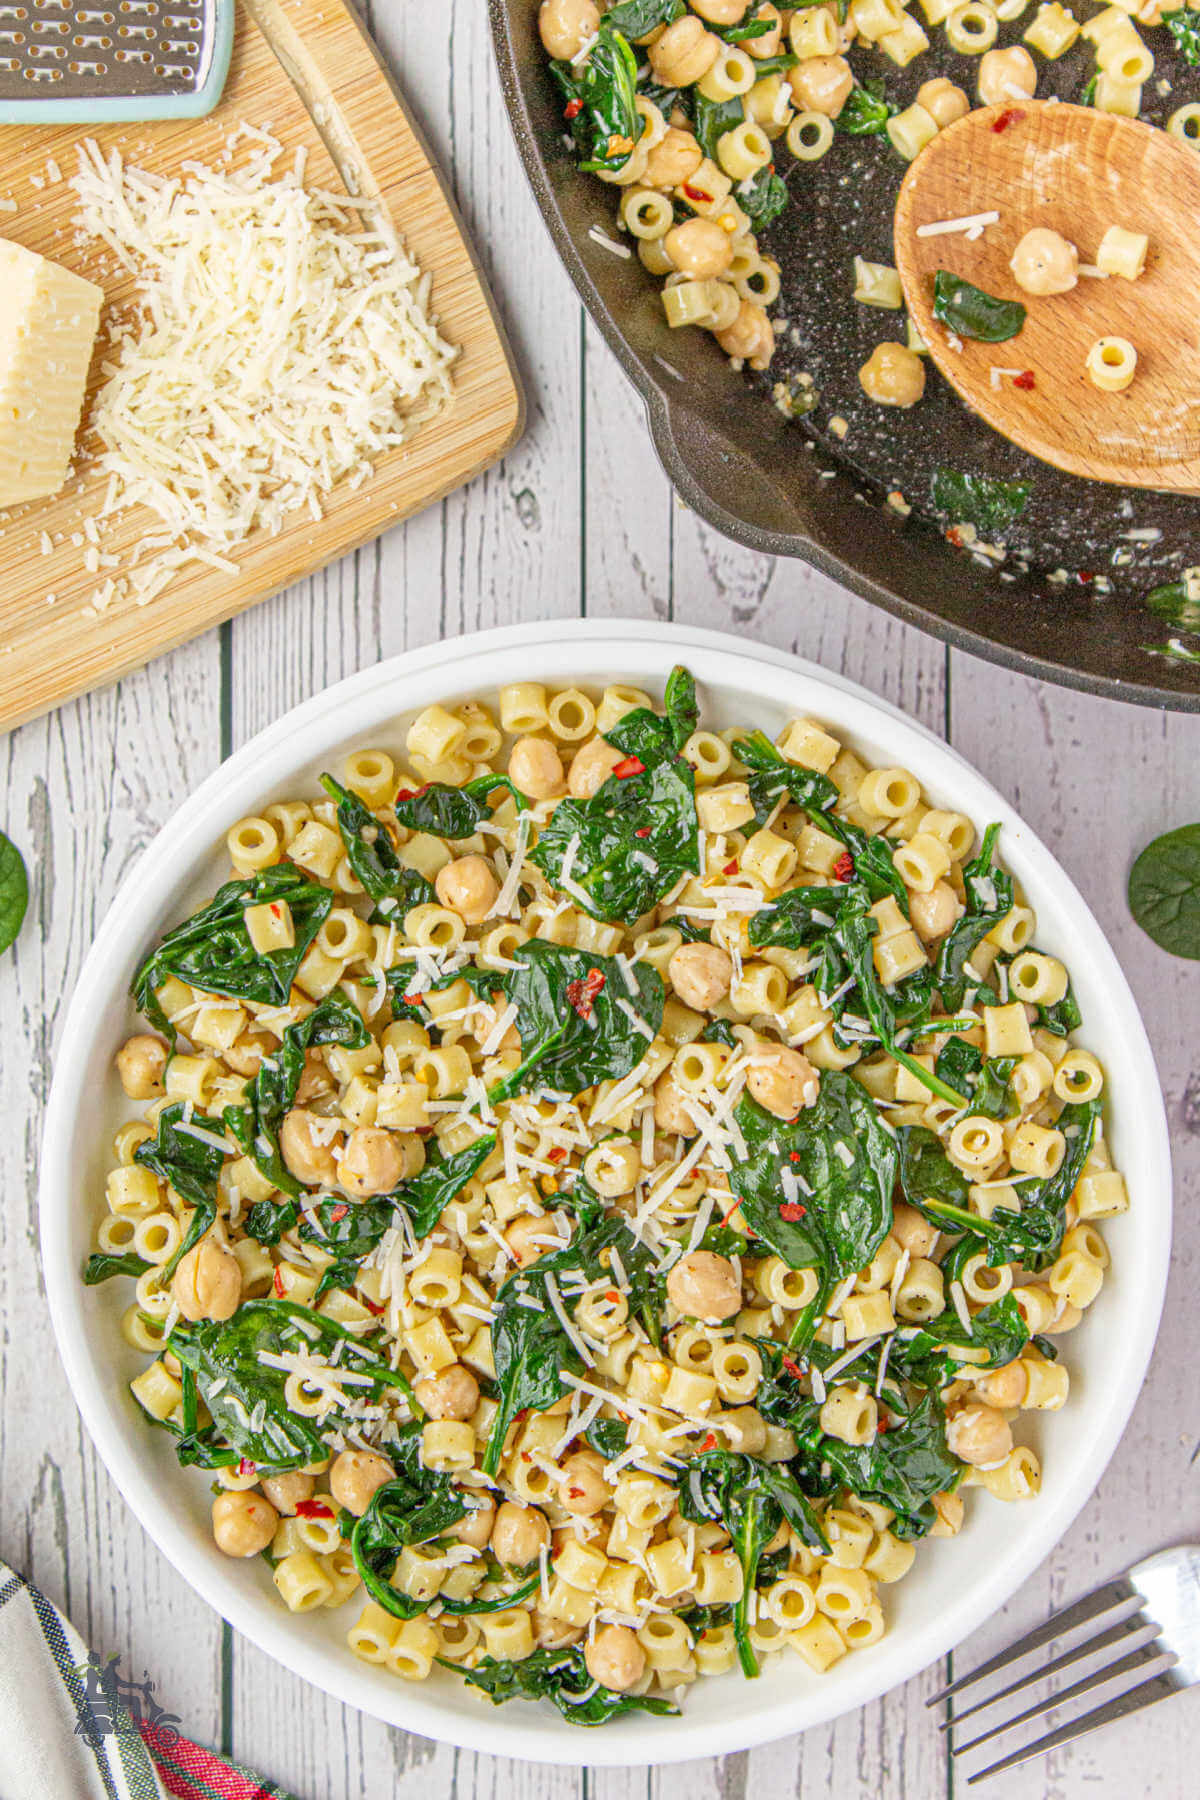 Chickpeas and pasta with spinach and red pepper flakes in a white ceramic bowl with a wood board holding pecorino romano grated cheese. 